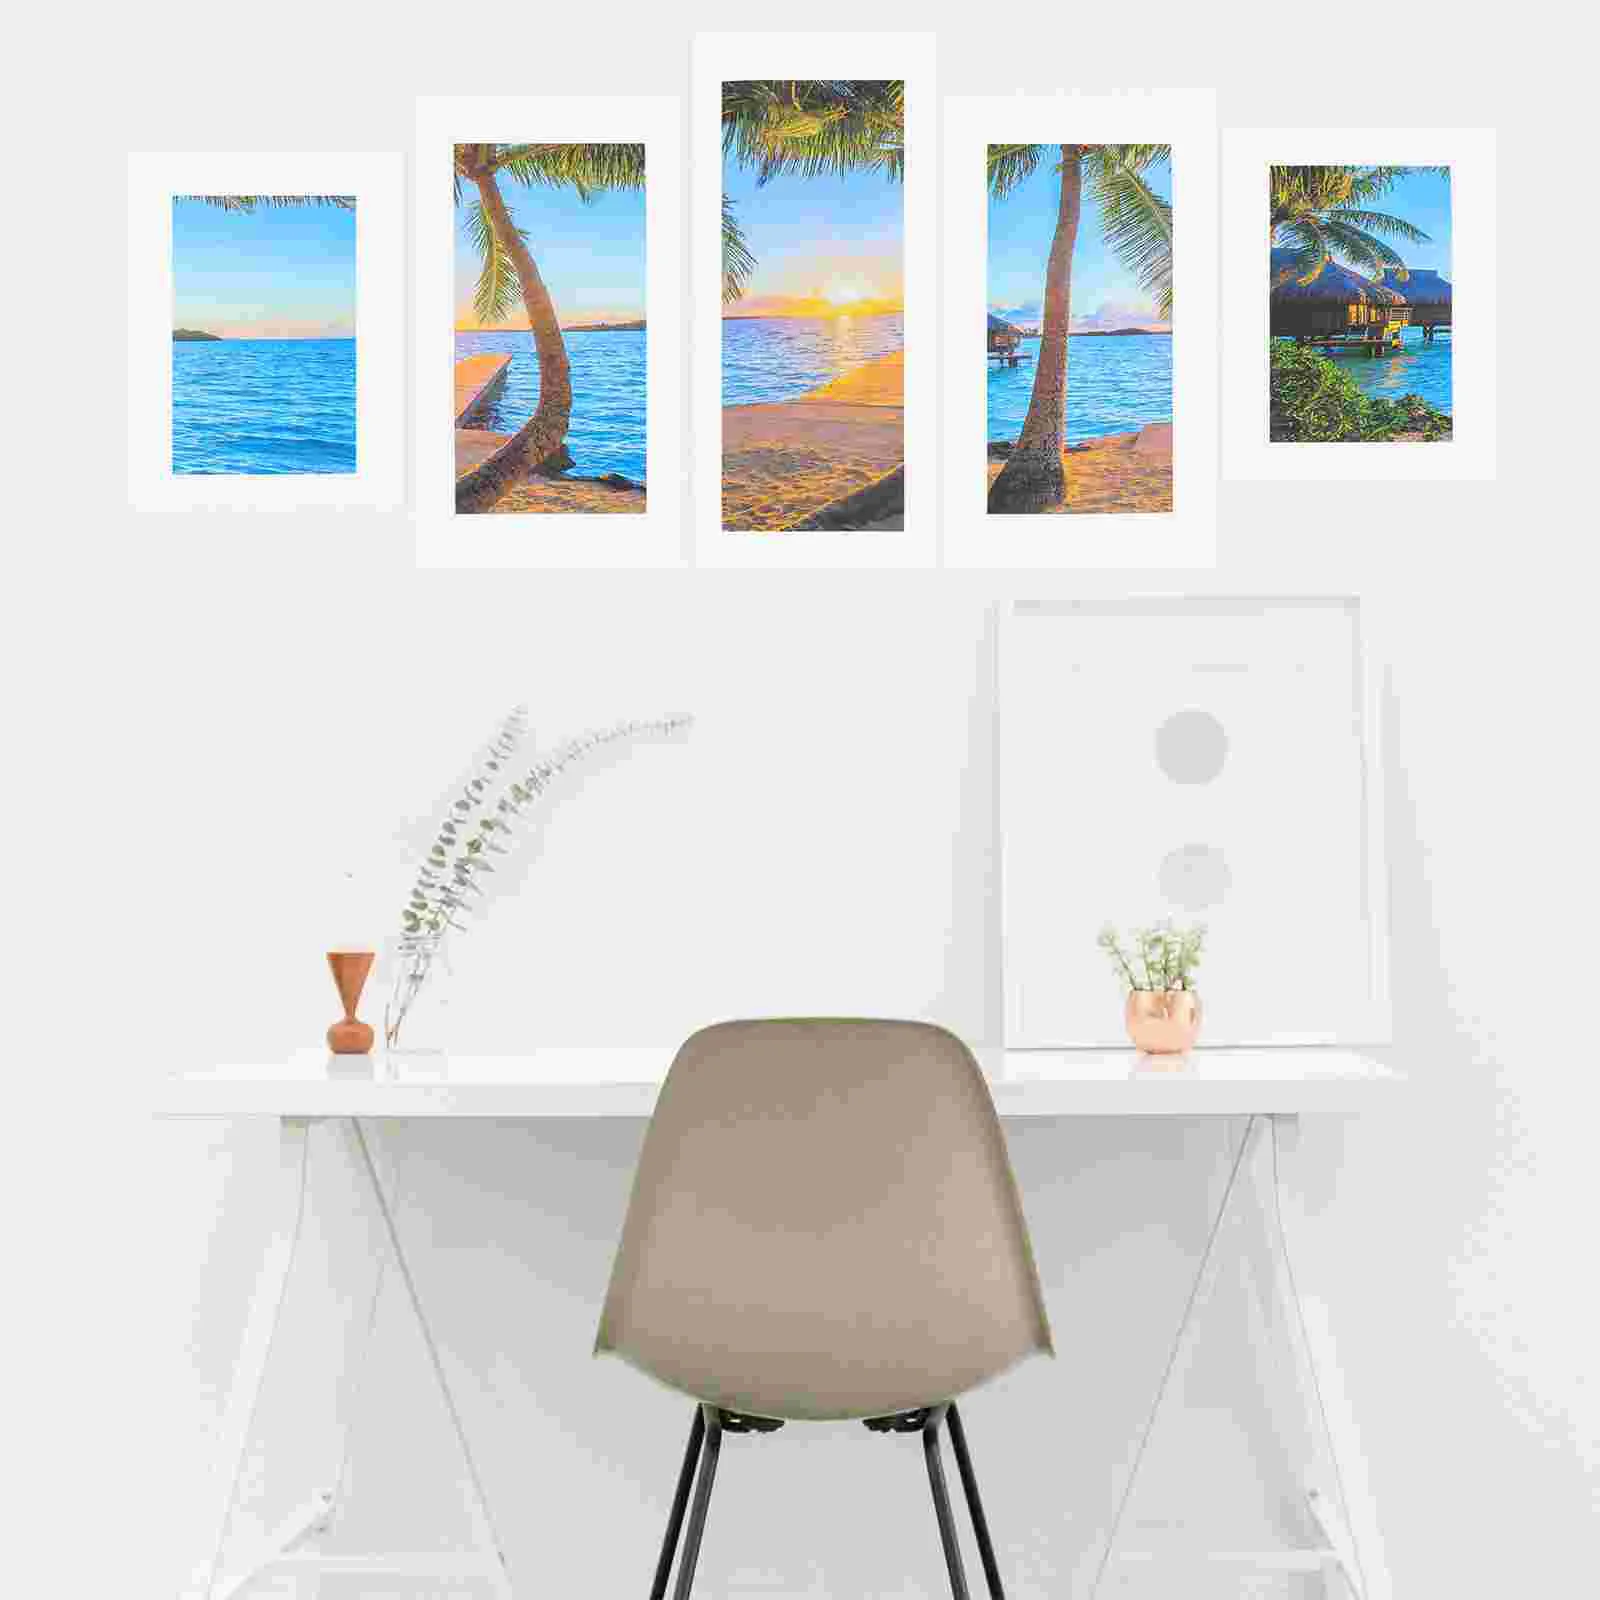 

Landscape Painting Decorative Wall Ornaments Beach Canvas Paintings Art For Living Room Mural Seascapes Decors Bedroom Seaside